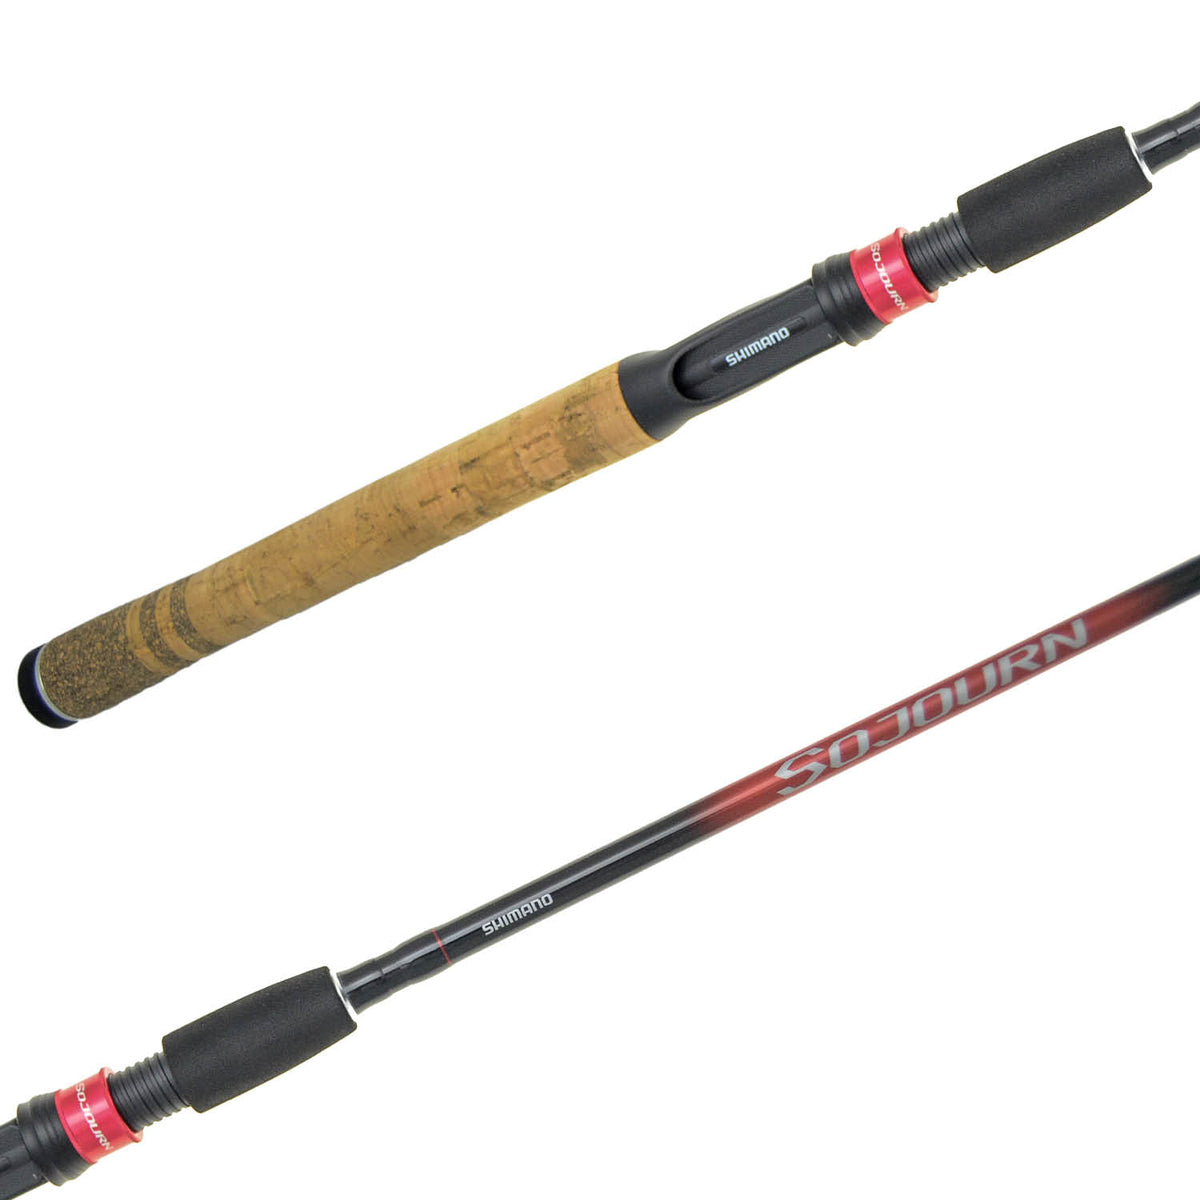 Shimano Sojourn Spinning Rods